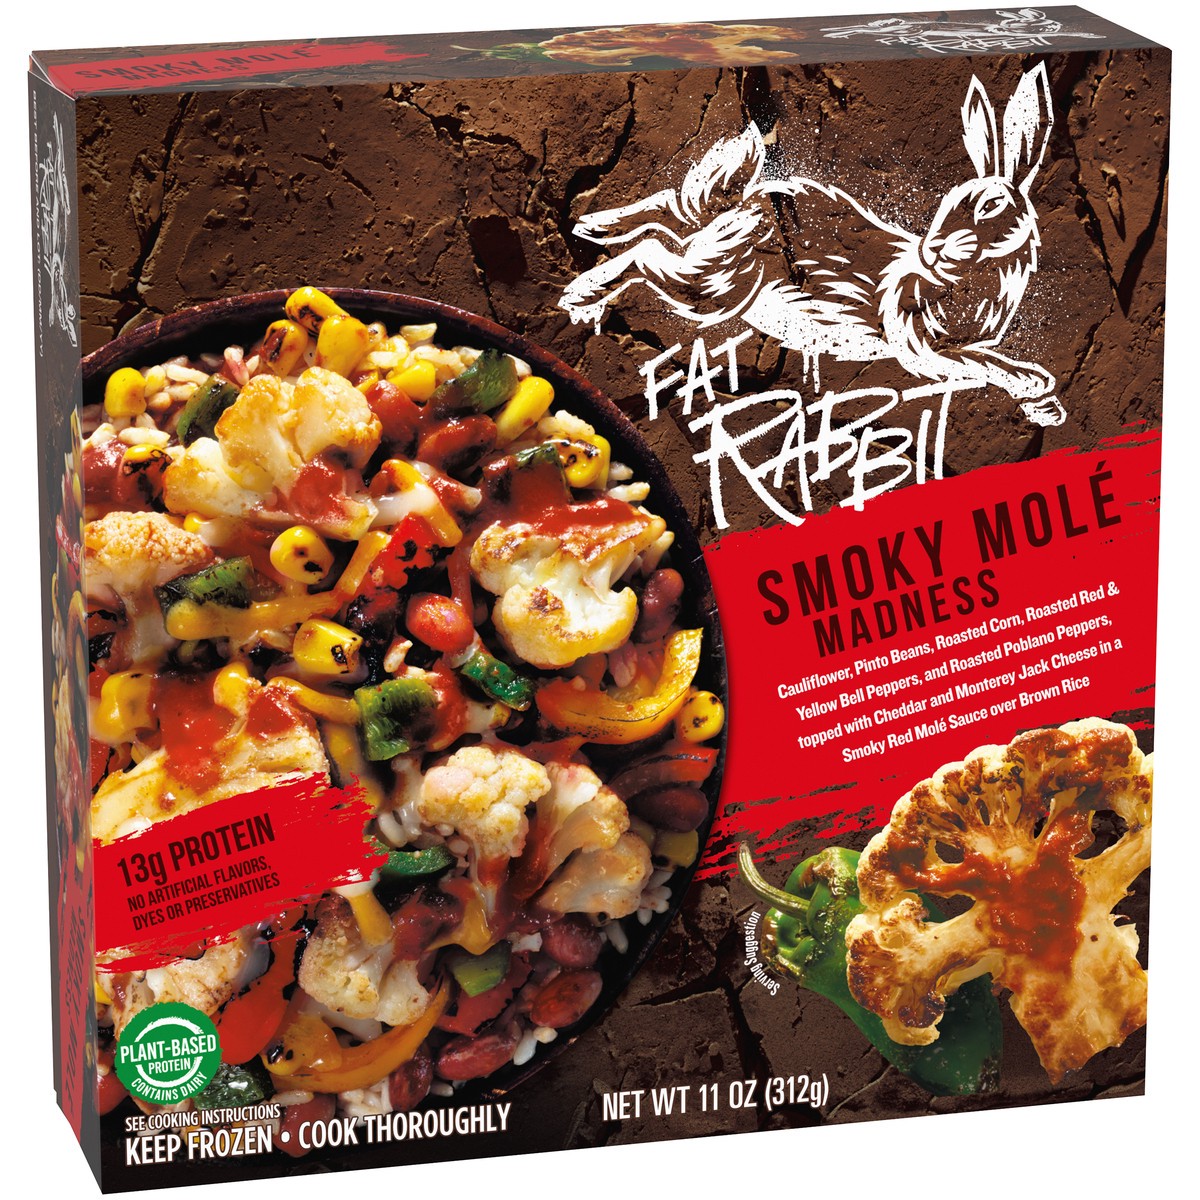 slide 6 of 14, Fat Rabbit Smoky Mole Madness with Roasted Vegetables, Pinto Beans & Cheese in a Red Mole Sauce over Brown Rice Frozen Meal, 11 oz Box, 11 oz